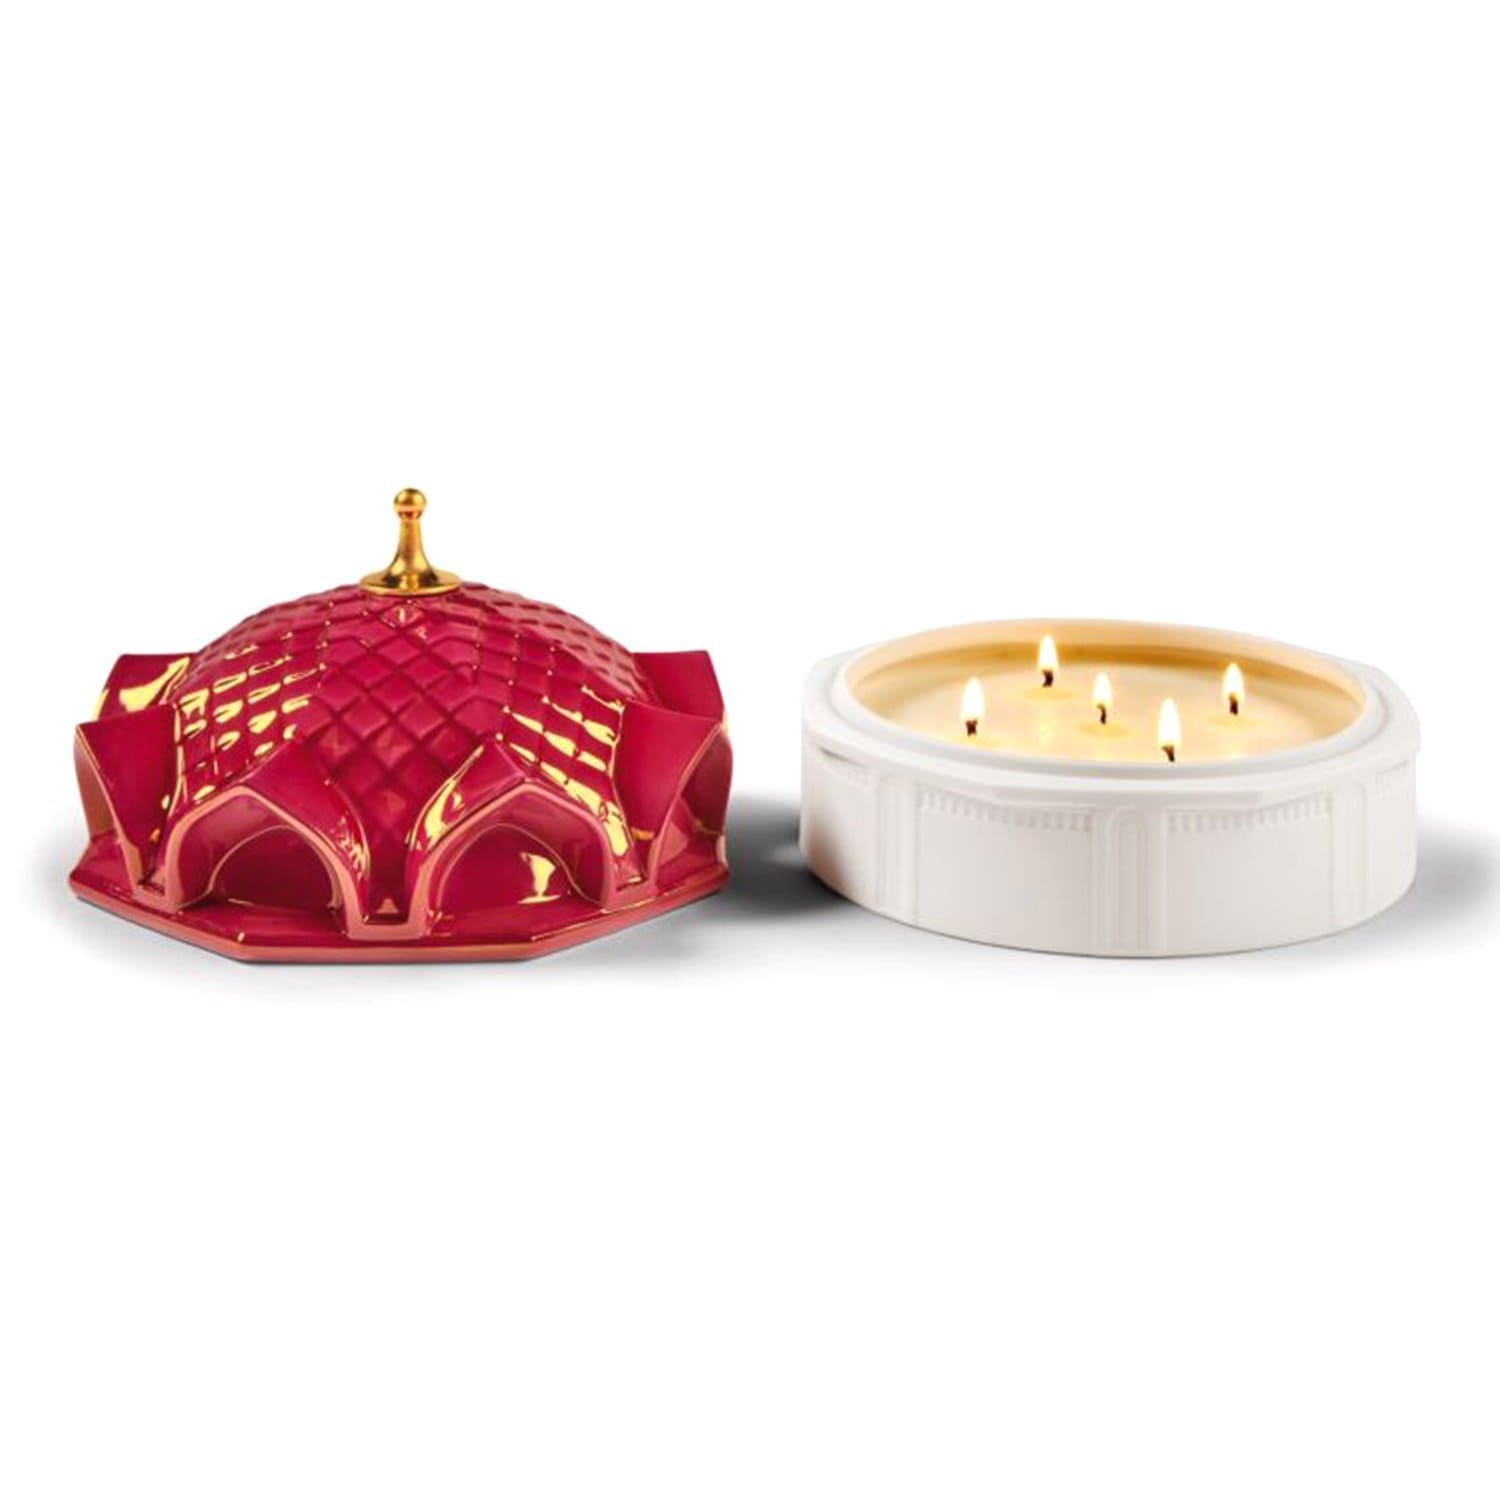 Lladro 1001 Lights Scheherazade's Quarters Candle Night Approaches Scent - 1040174 - Jashanmal Home